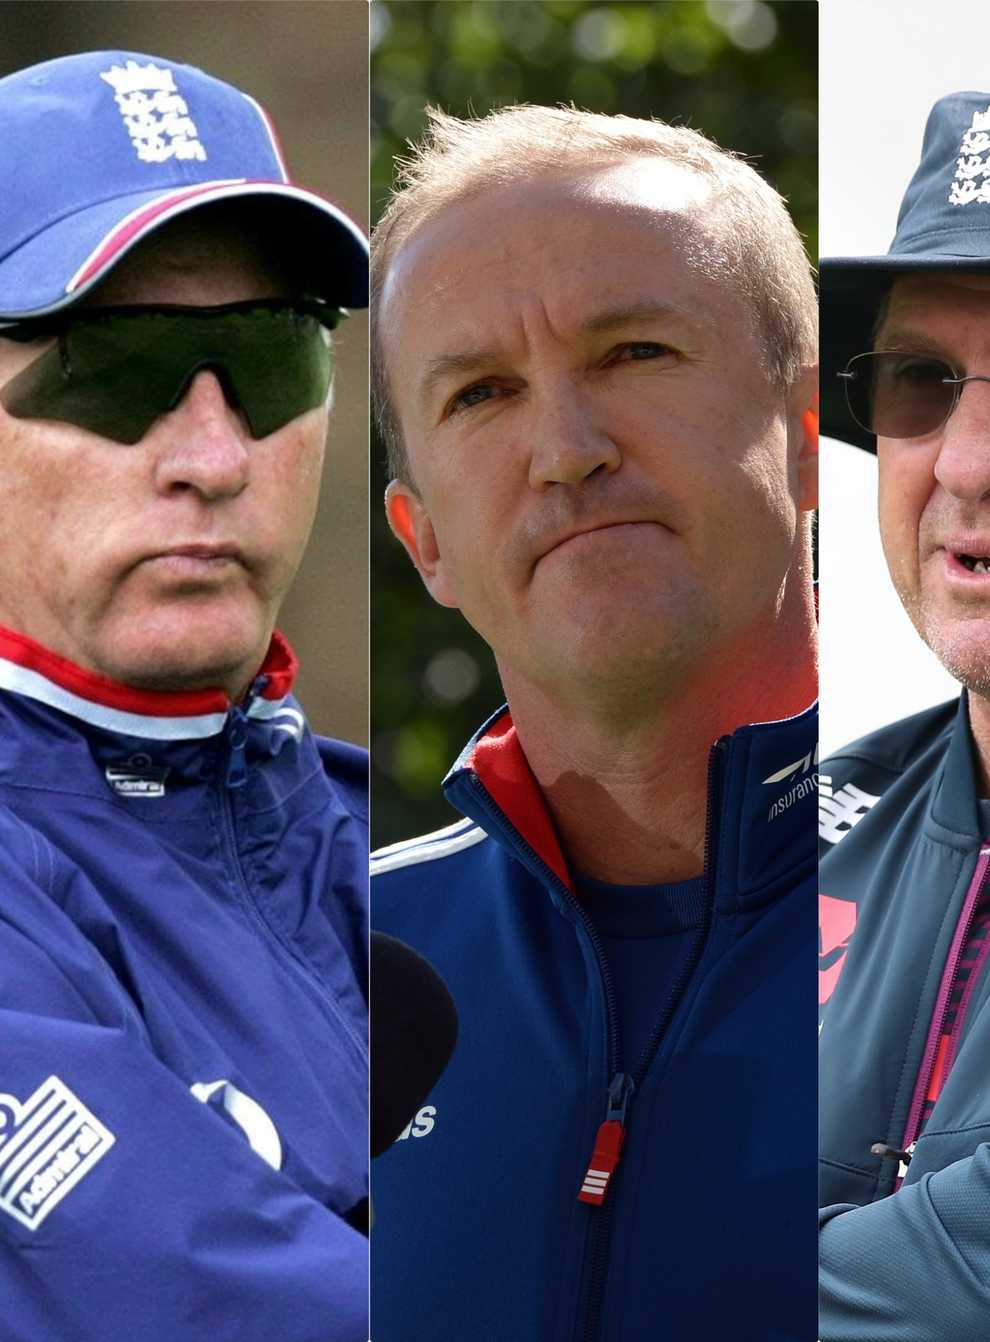 Duncan Fletcher, Andy Flower and Trevor Bayliss have all led England in recent years (PA)